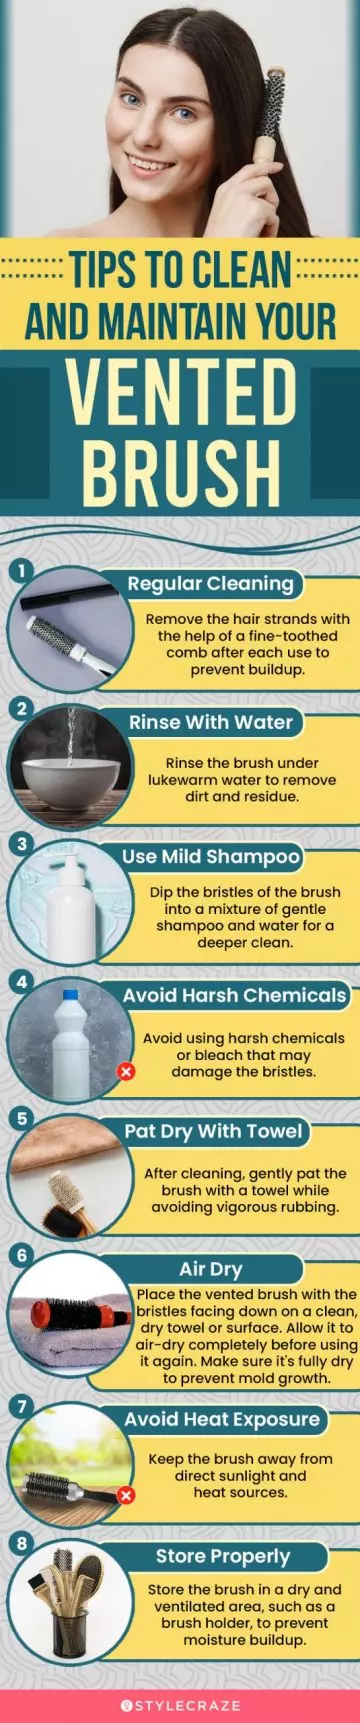 Tips To Clean And Maintain Your Vented Brush (infographic)